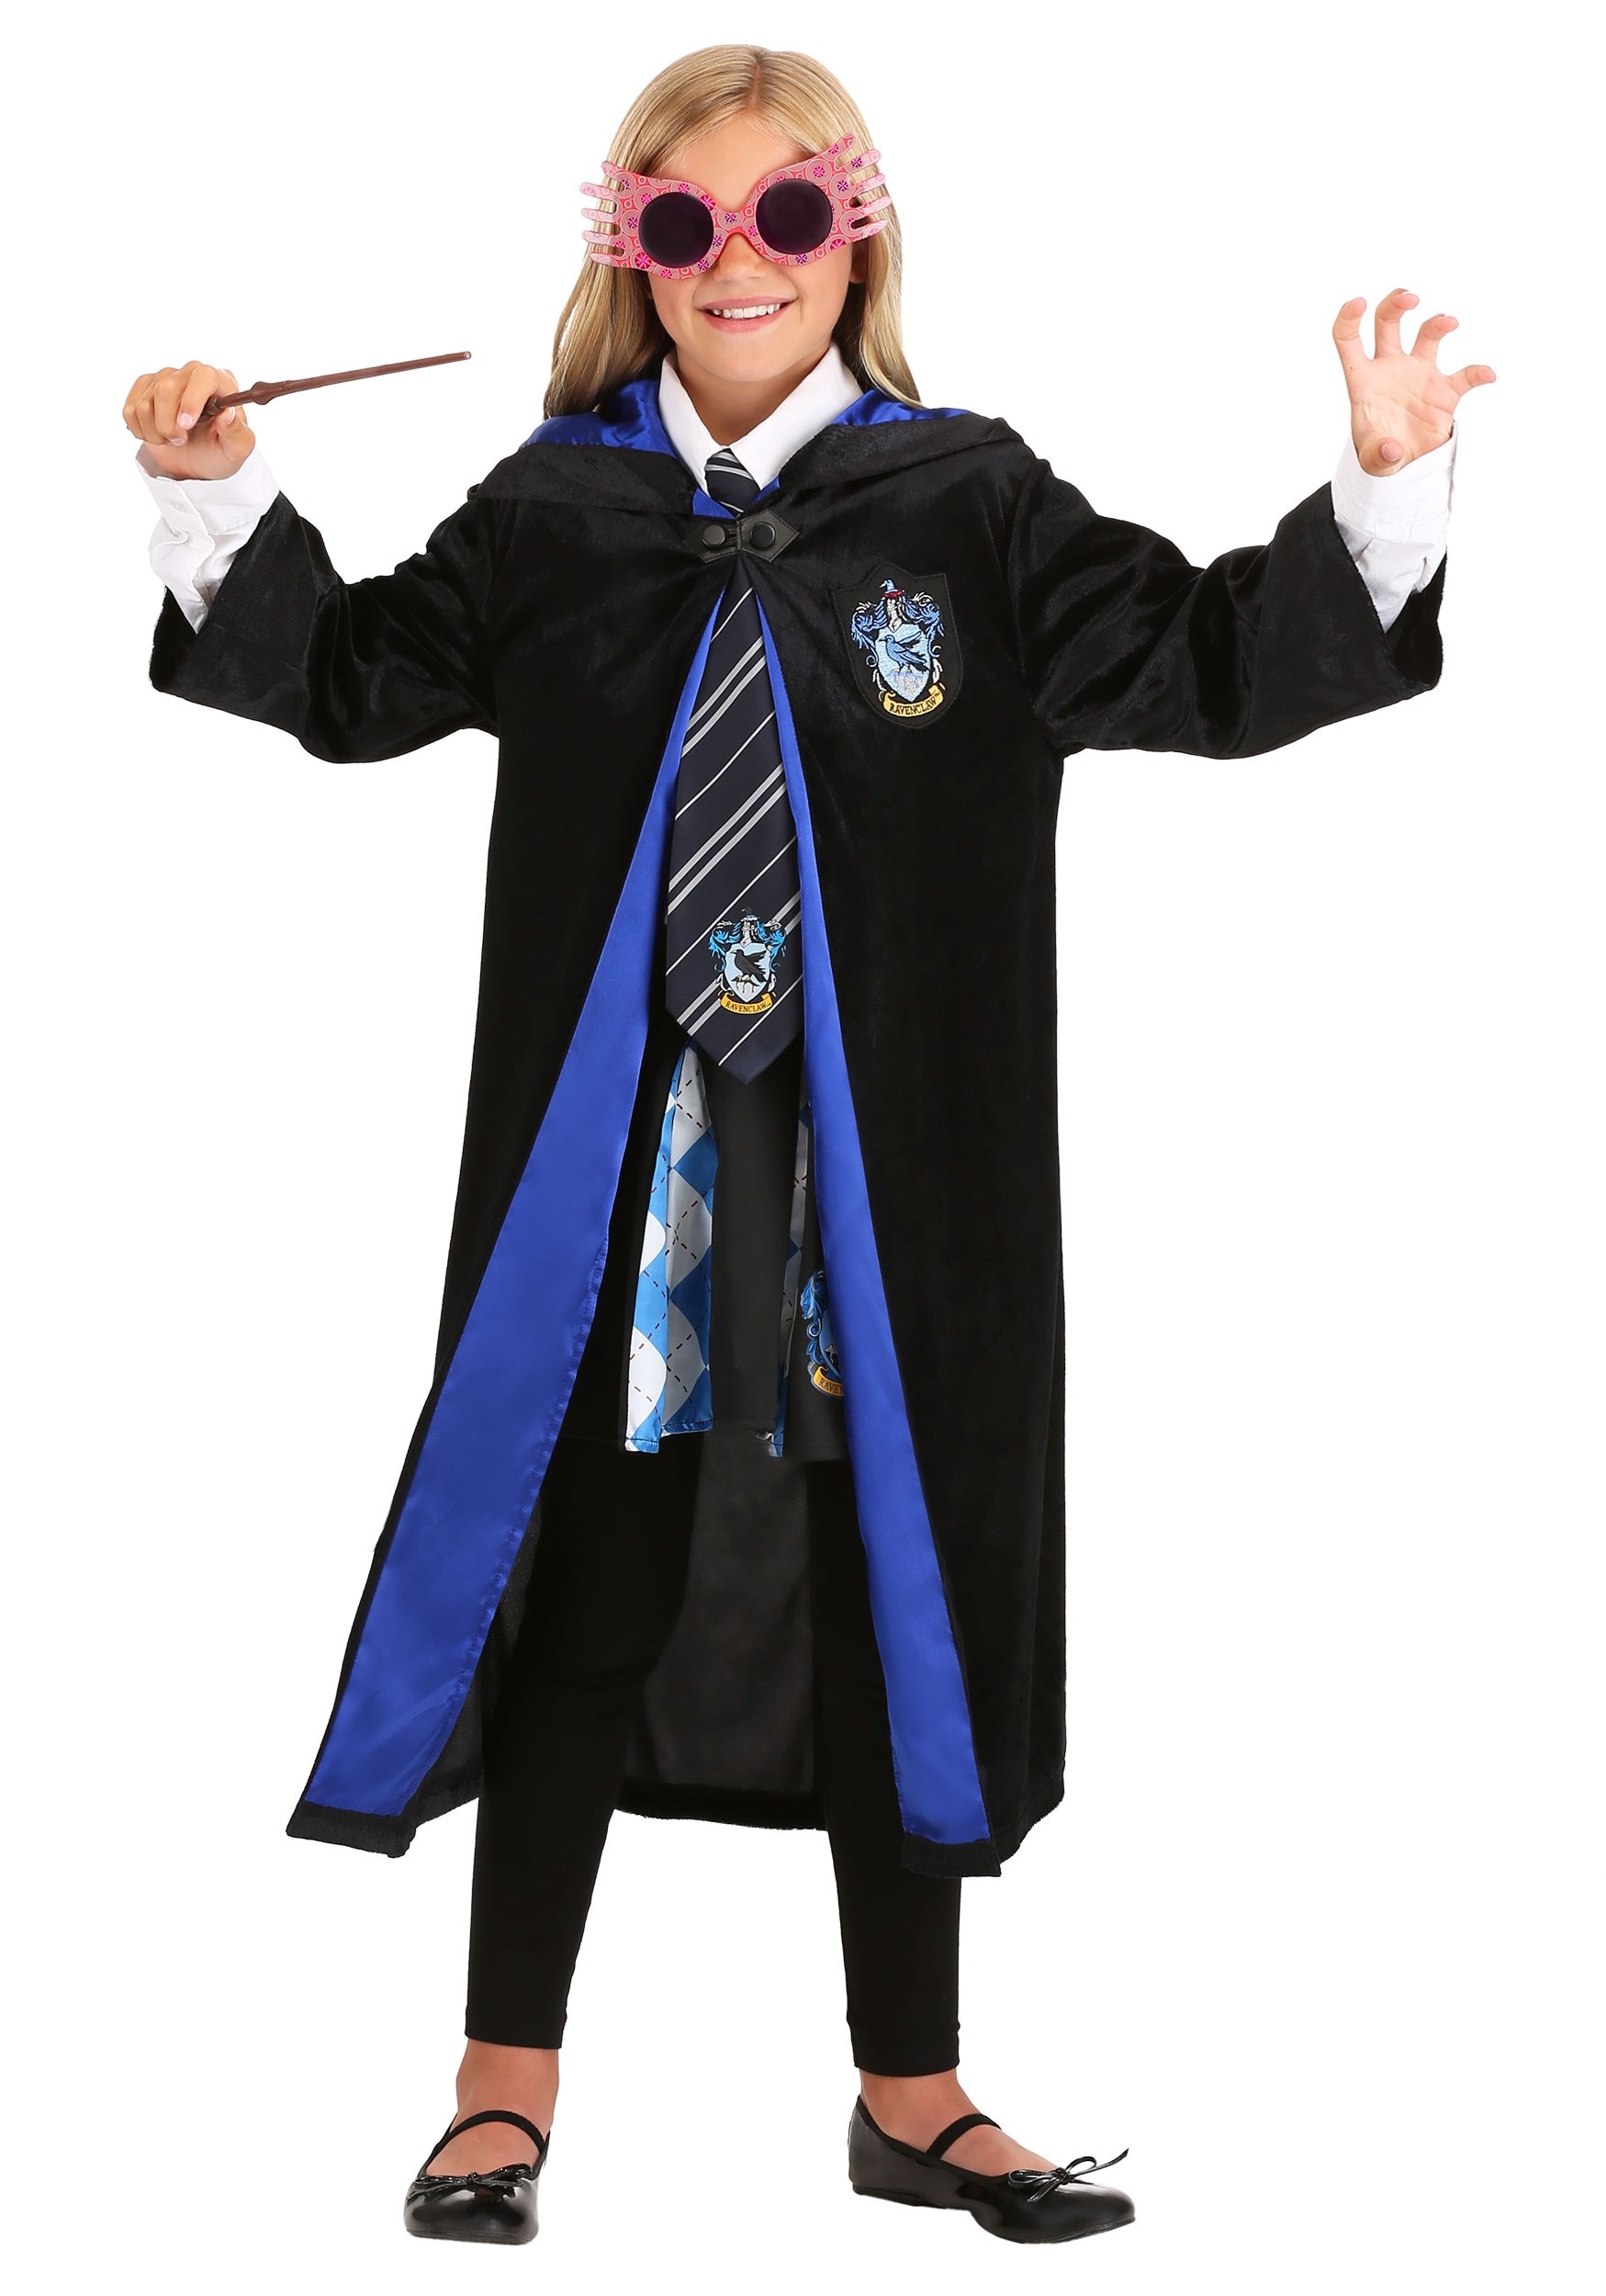 Hermione Granger Costume Kids, Harry Potter Costume Robe Shirt Hat Tie  Scarf Glasses Magic Wand 7 Pieces Set